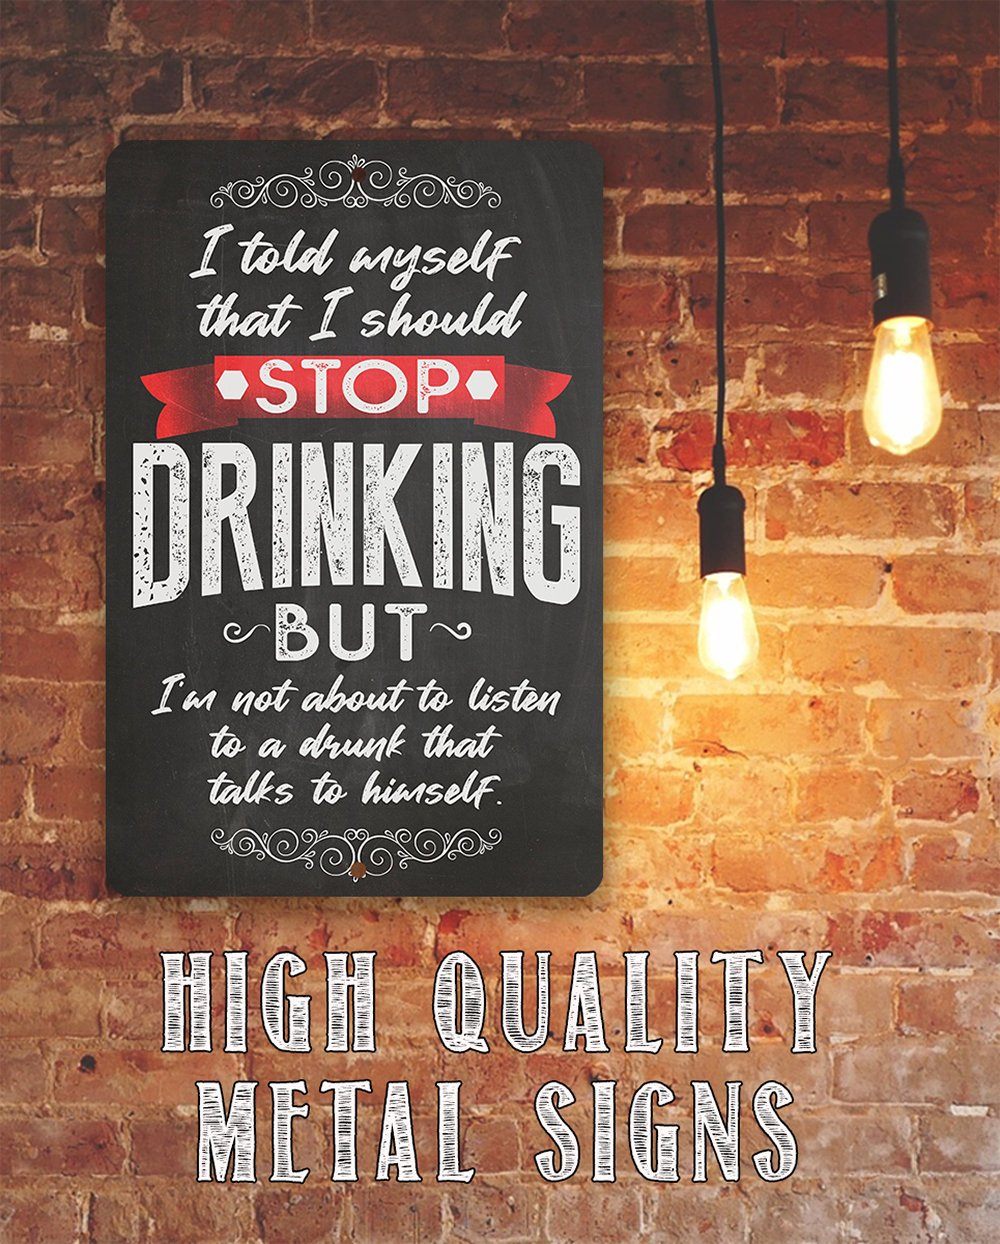 I Should Stop Drinking - Metal Sign | Lone Star Art.